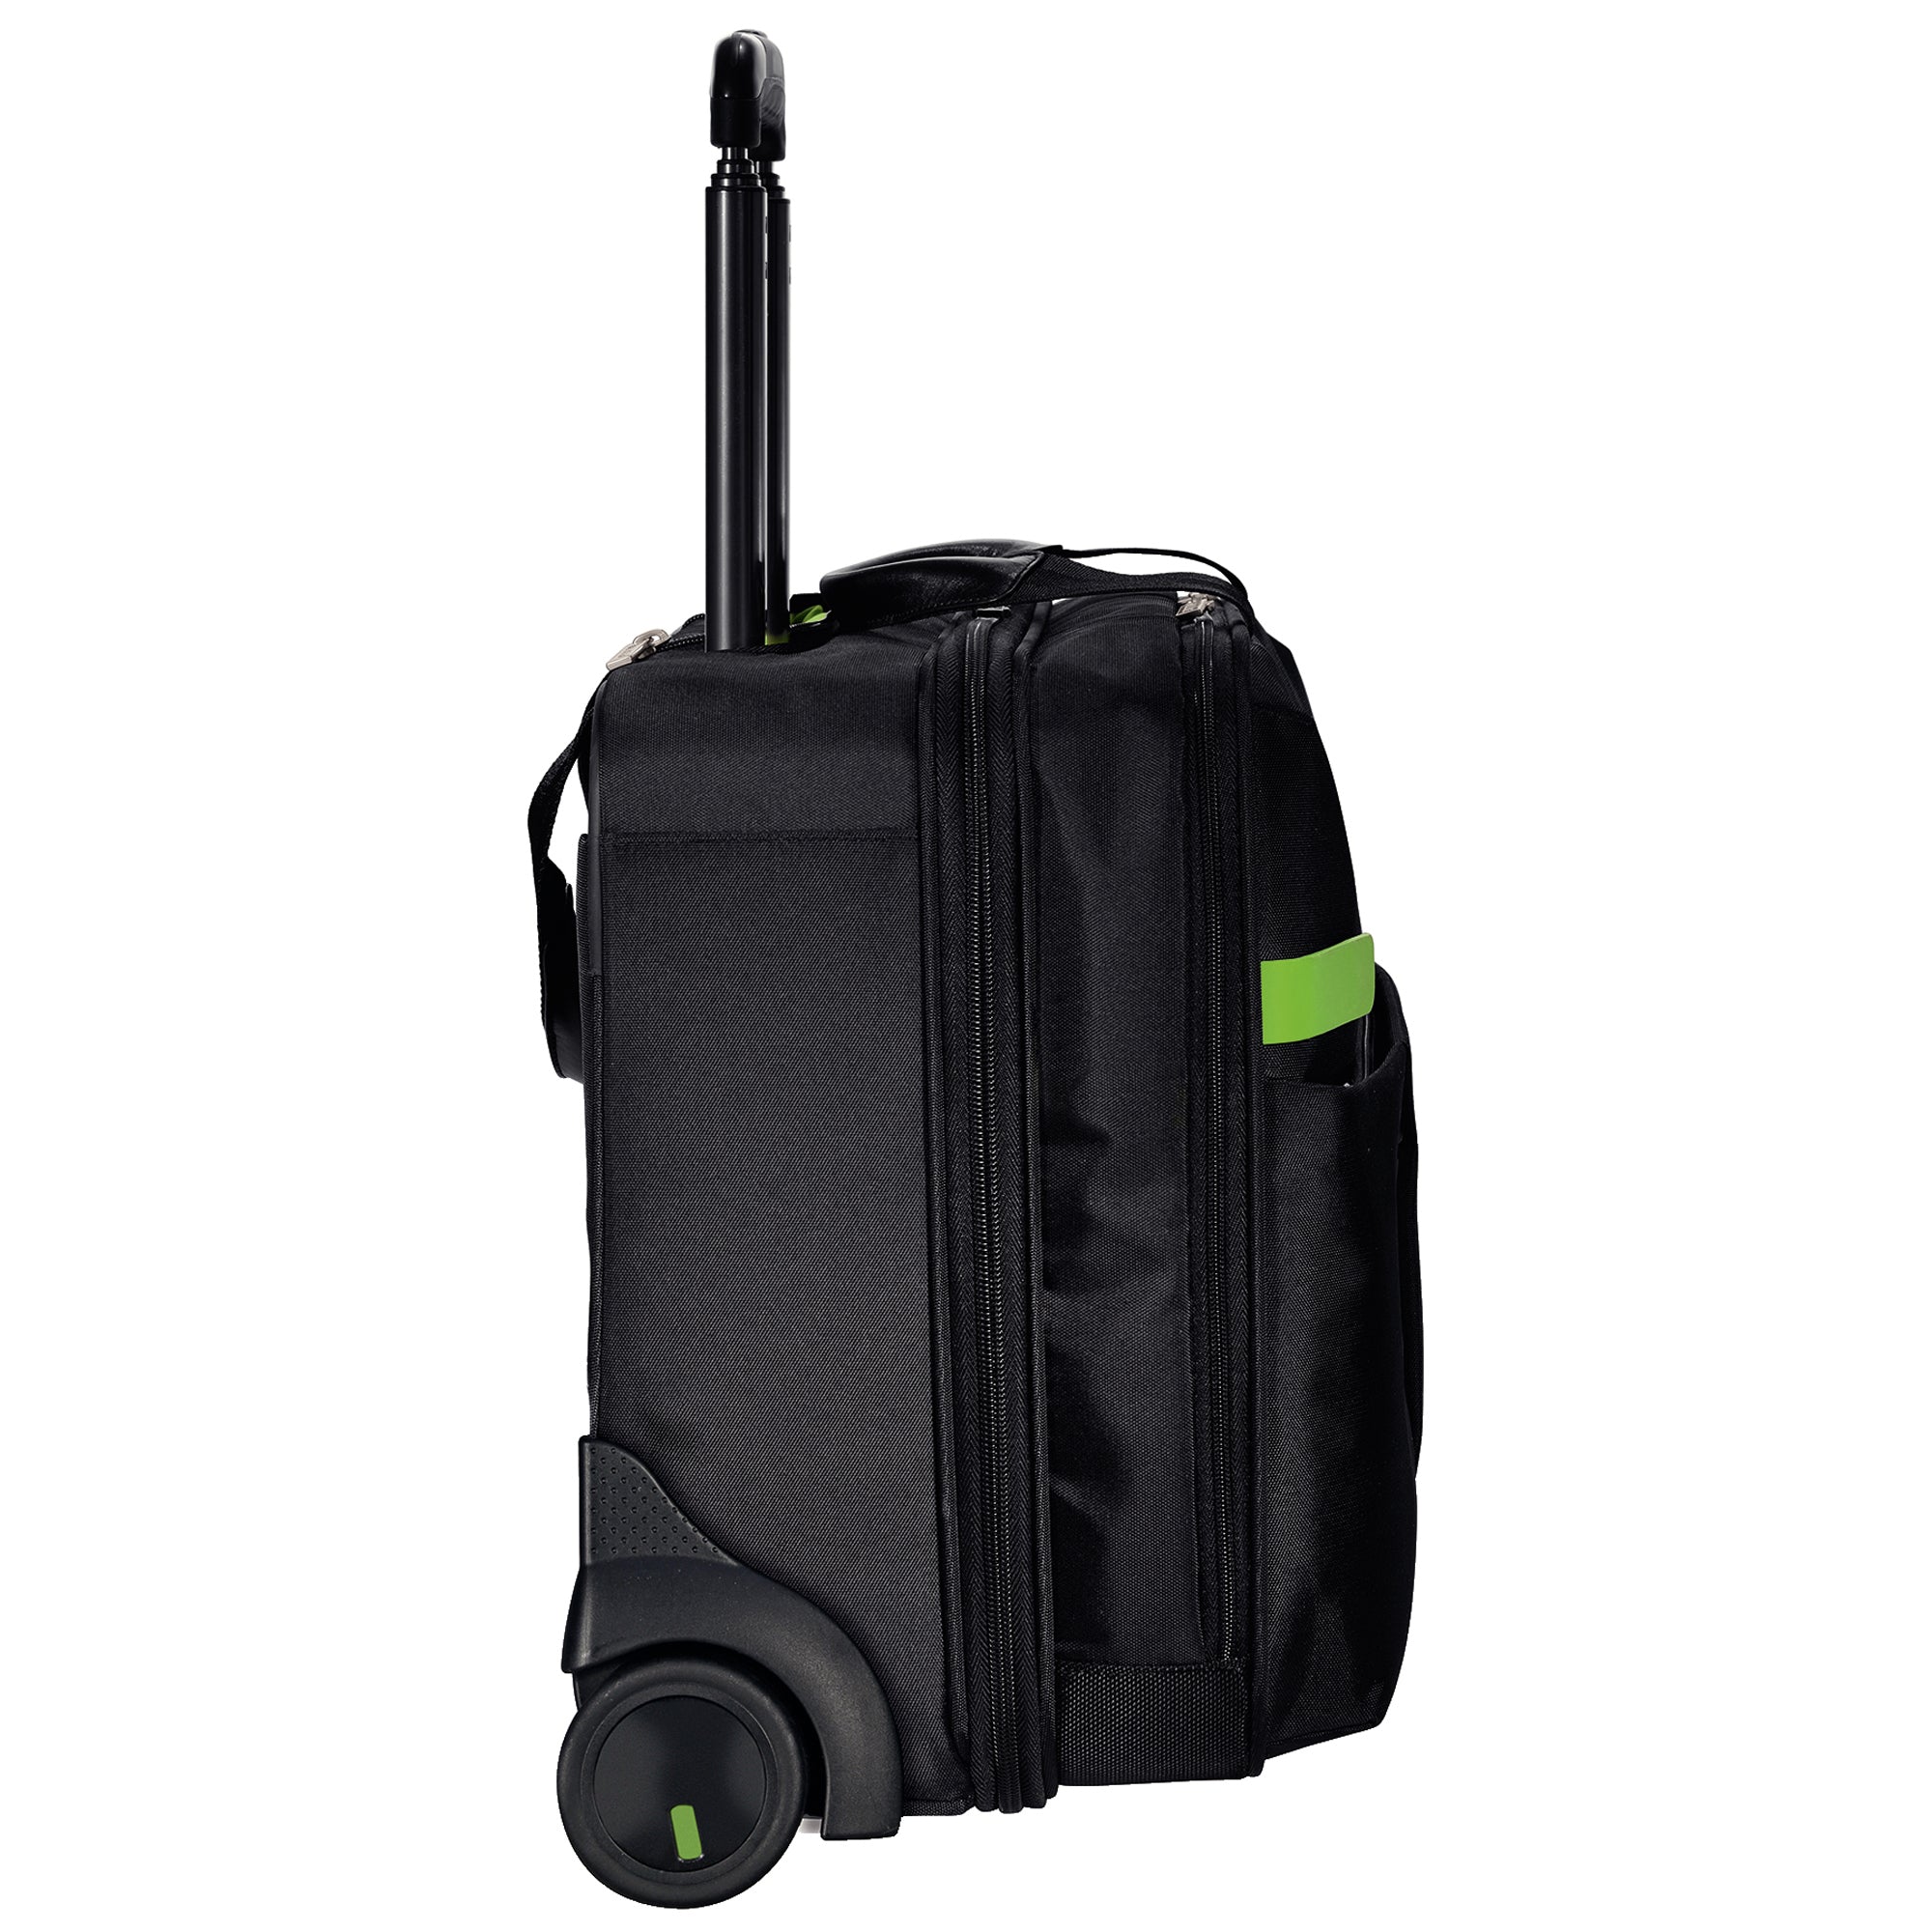 leitz-trolley-carry-on-smart-traveller-complete